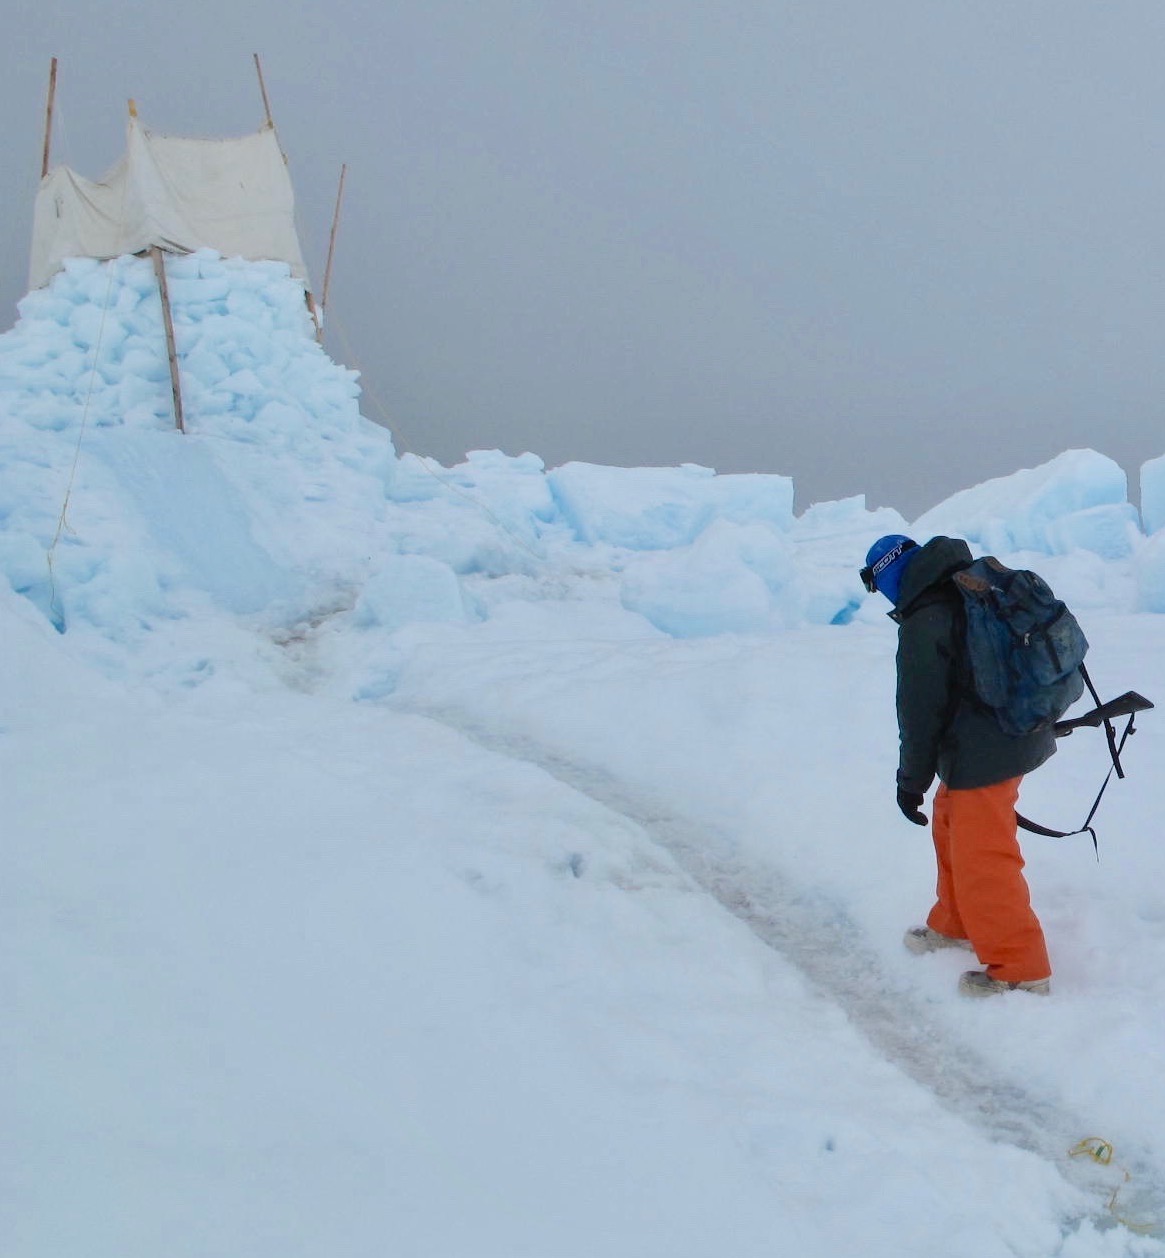 A man in winter gear carrying a rifle climbs a ridge of ice with a snow-block structure at the top. A canvas sheet rises above the snow blocks.